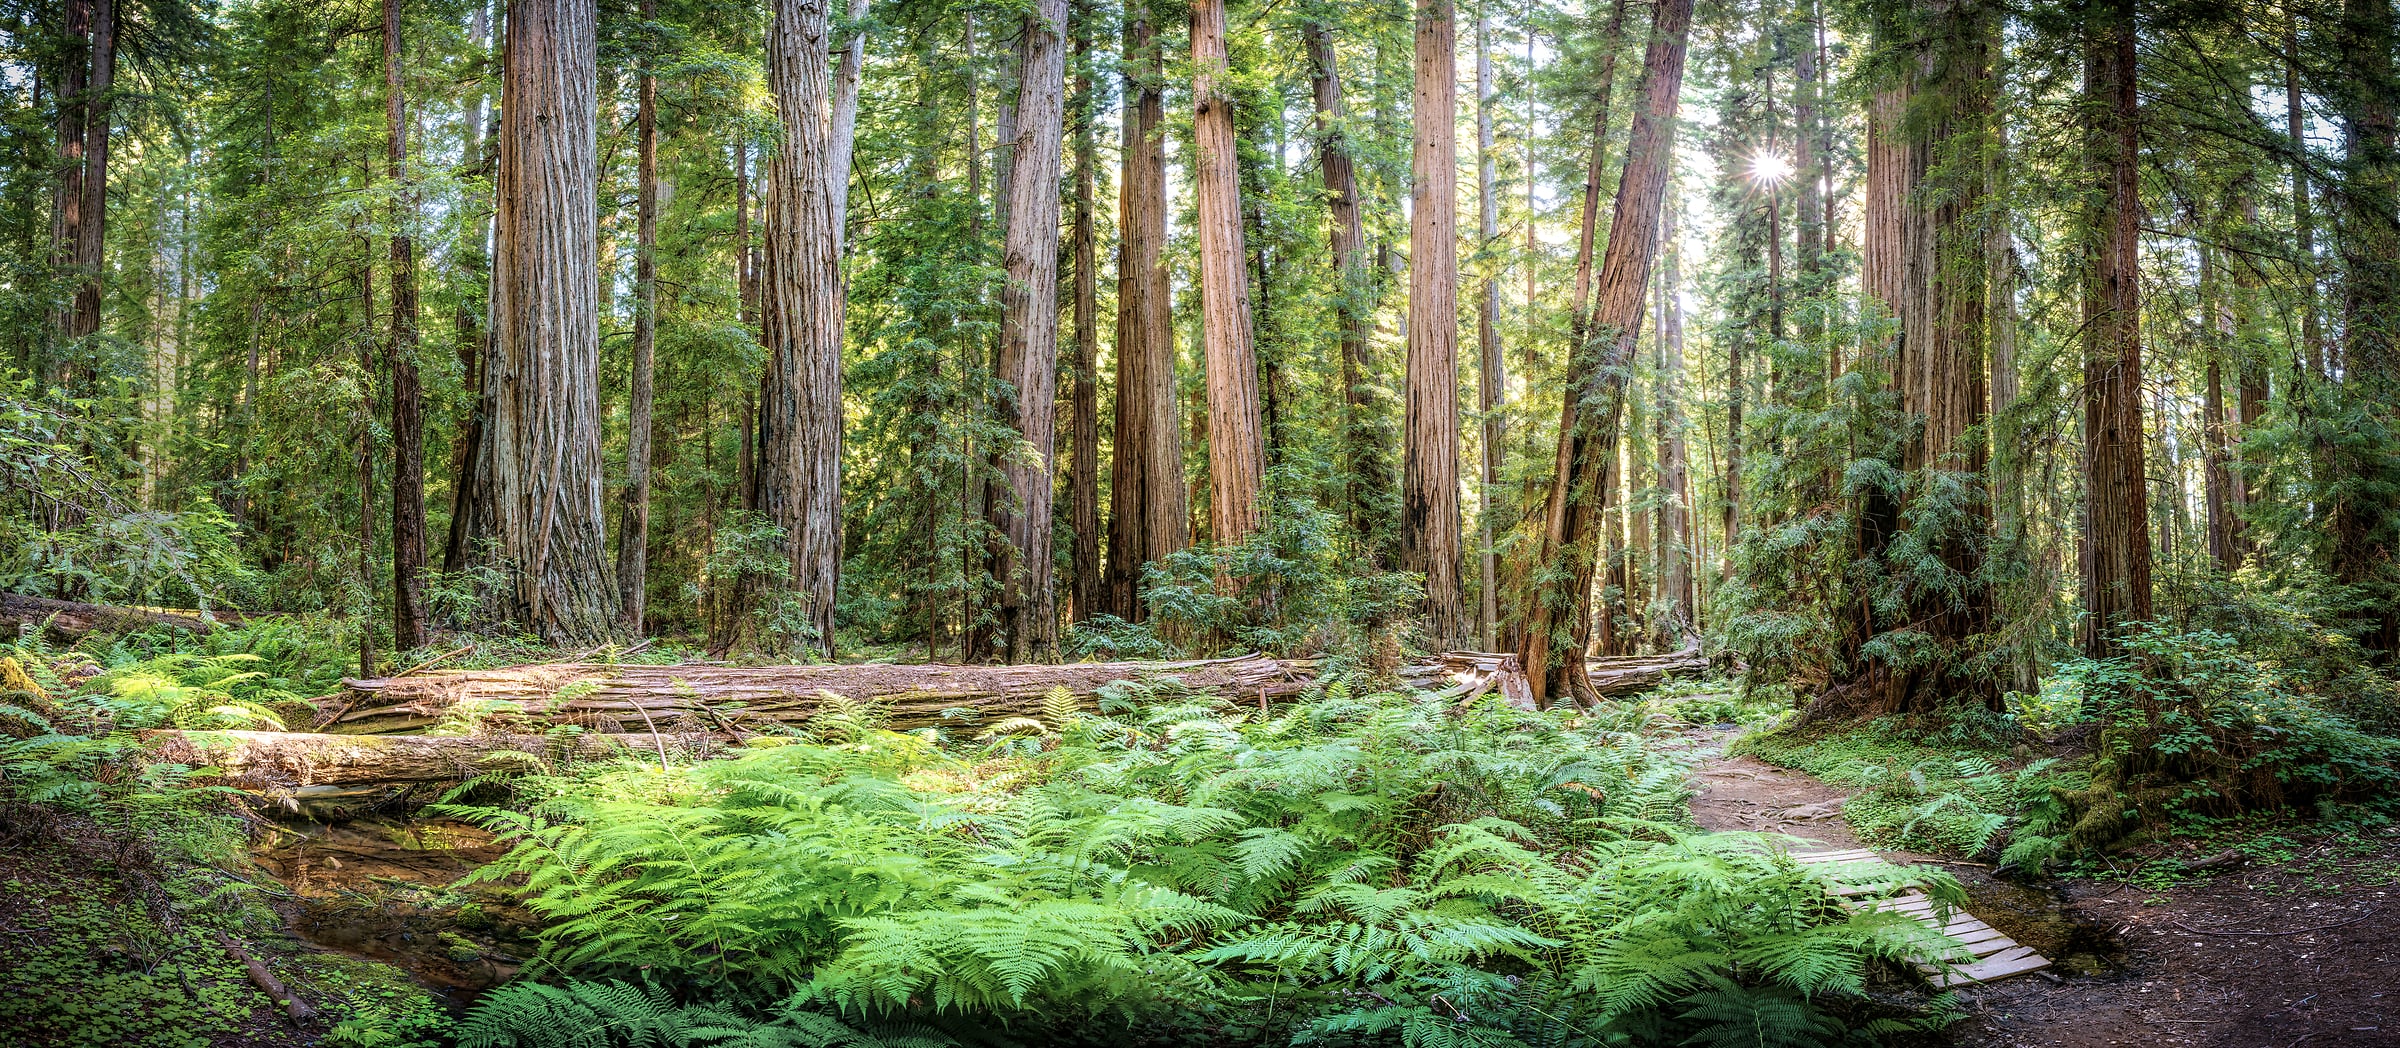 536 megapixels! A very high resolution, large-format VAST photo of a redwood forest with ferns and a creek; fine art nature photo created by Justin Katz in Montgomery Woods State Reserve, California.